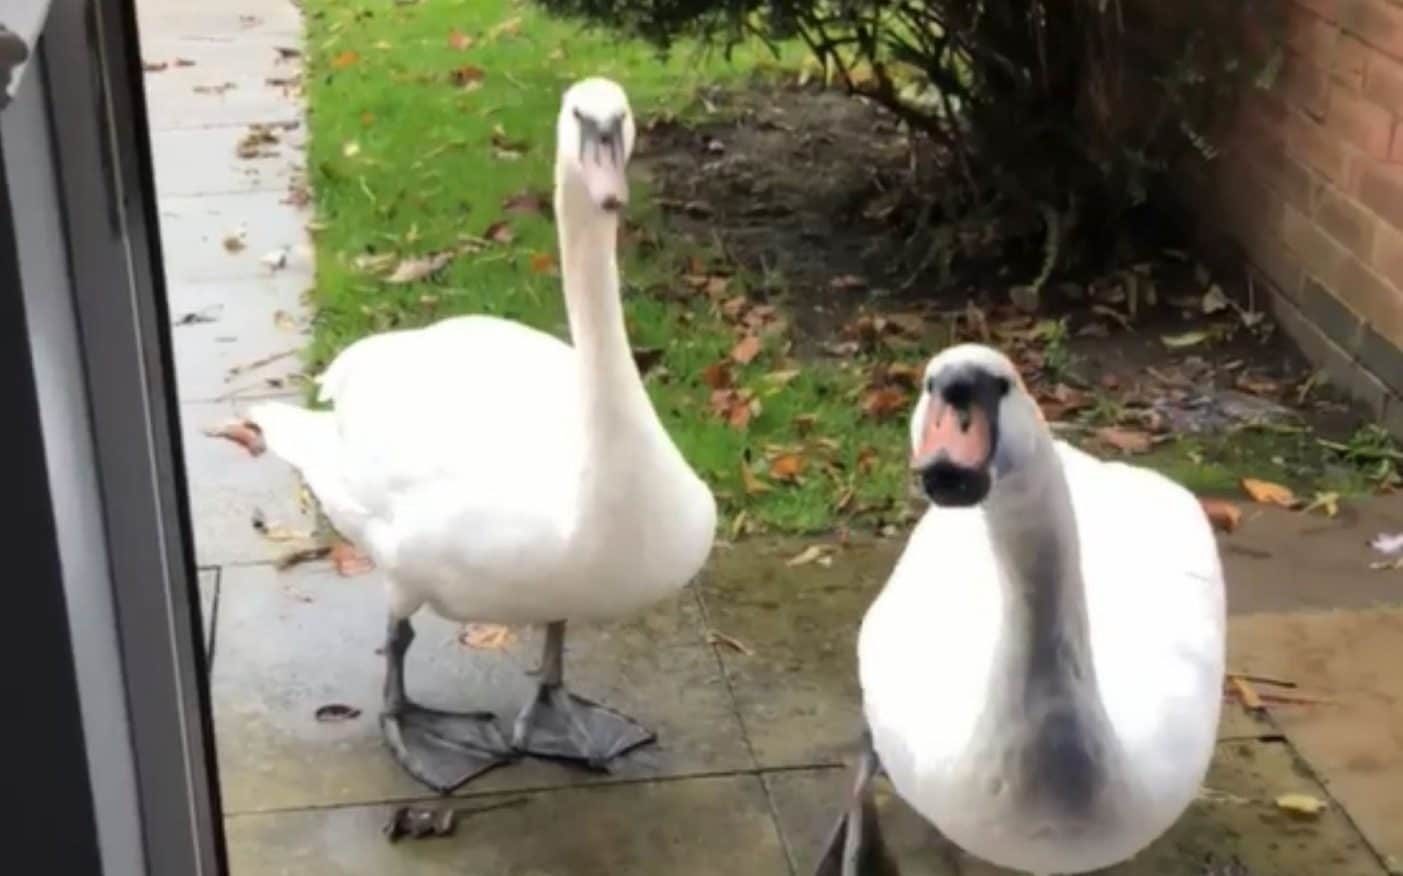 swans asking for food